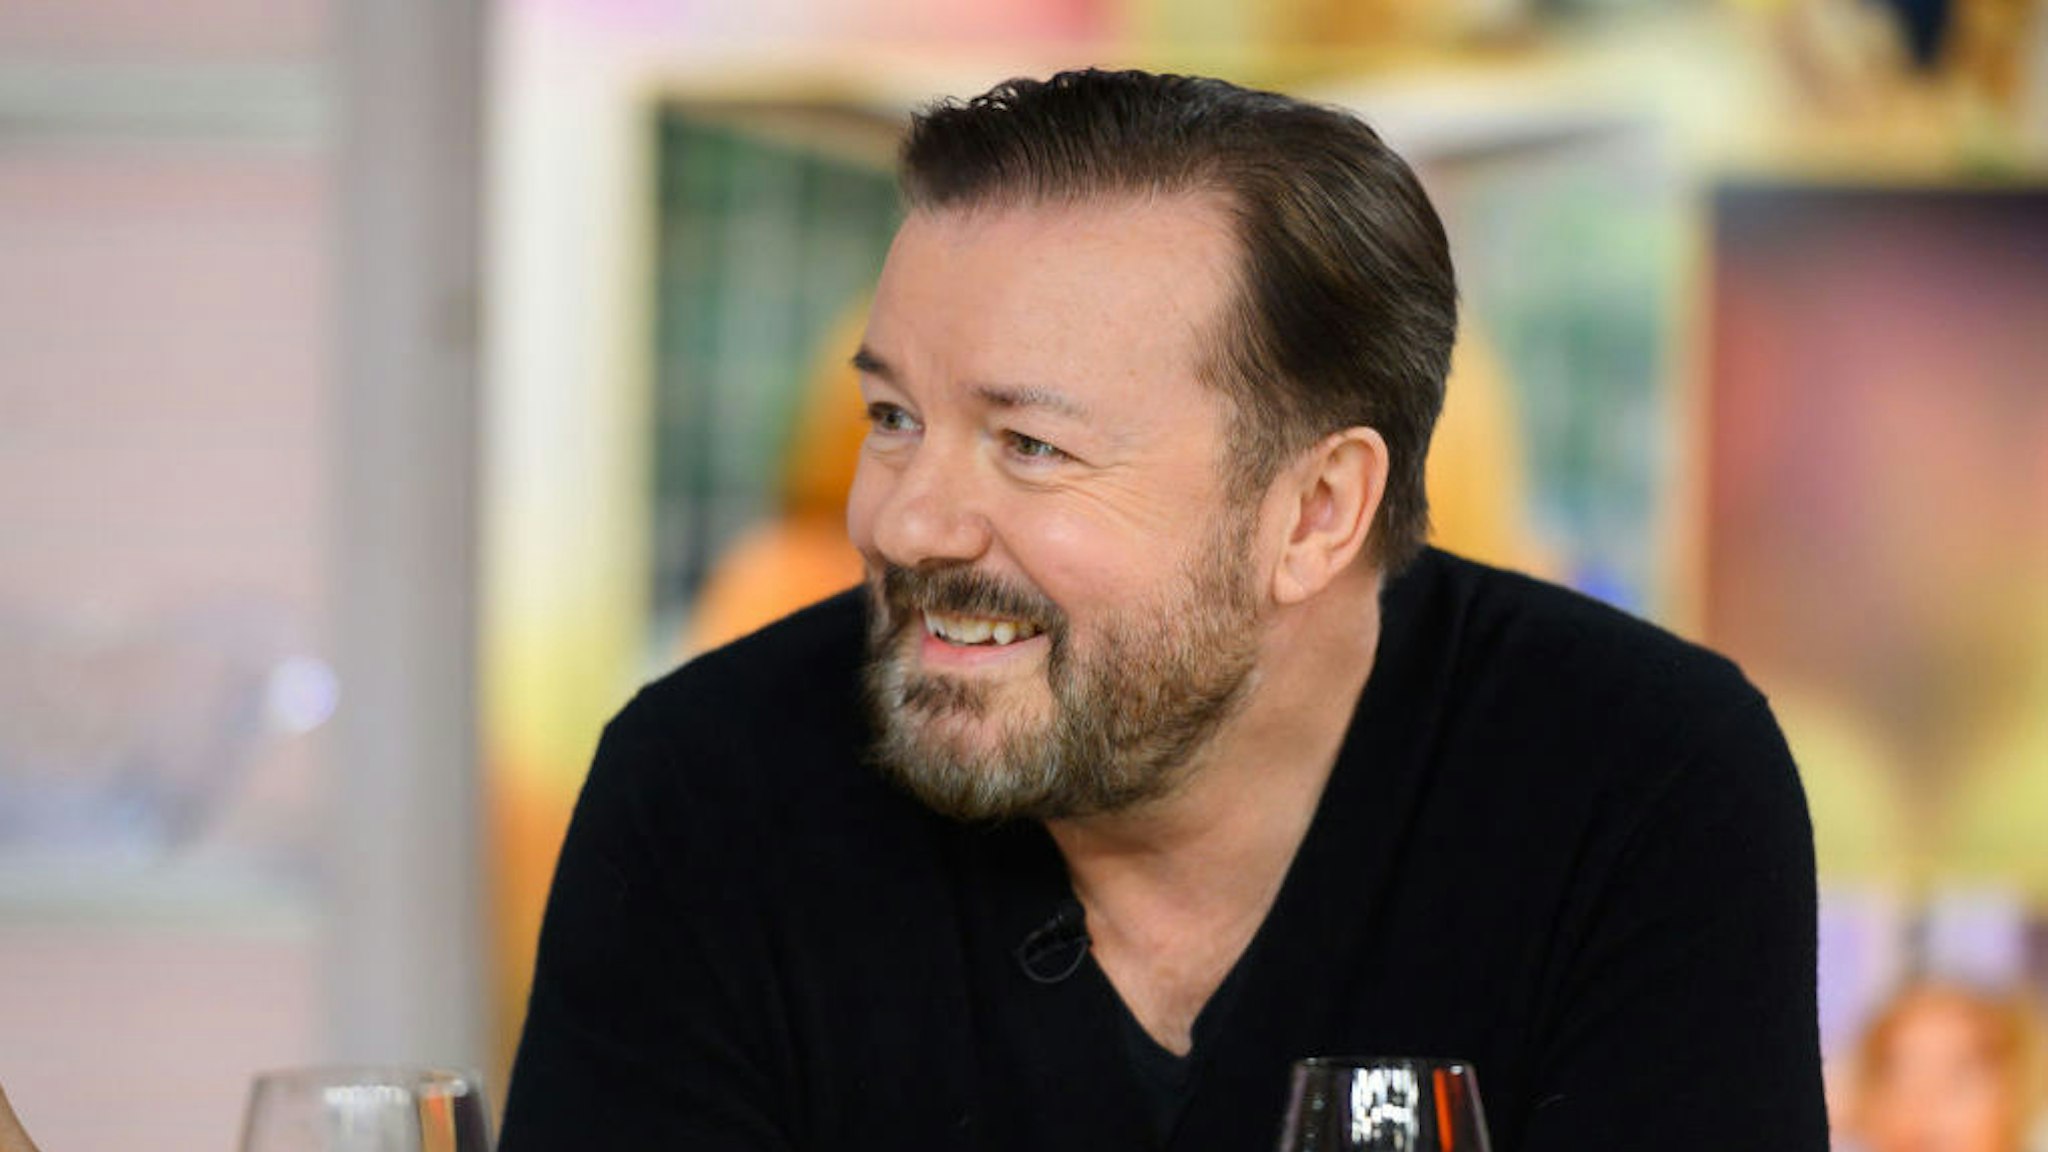 Ricky Gervais on Tuesday, March 12, 2019 -- (Photo by: Nathan Congleton/NBC/NBCU Photo Bank)